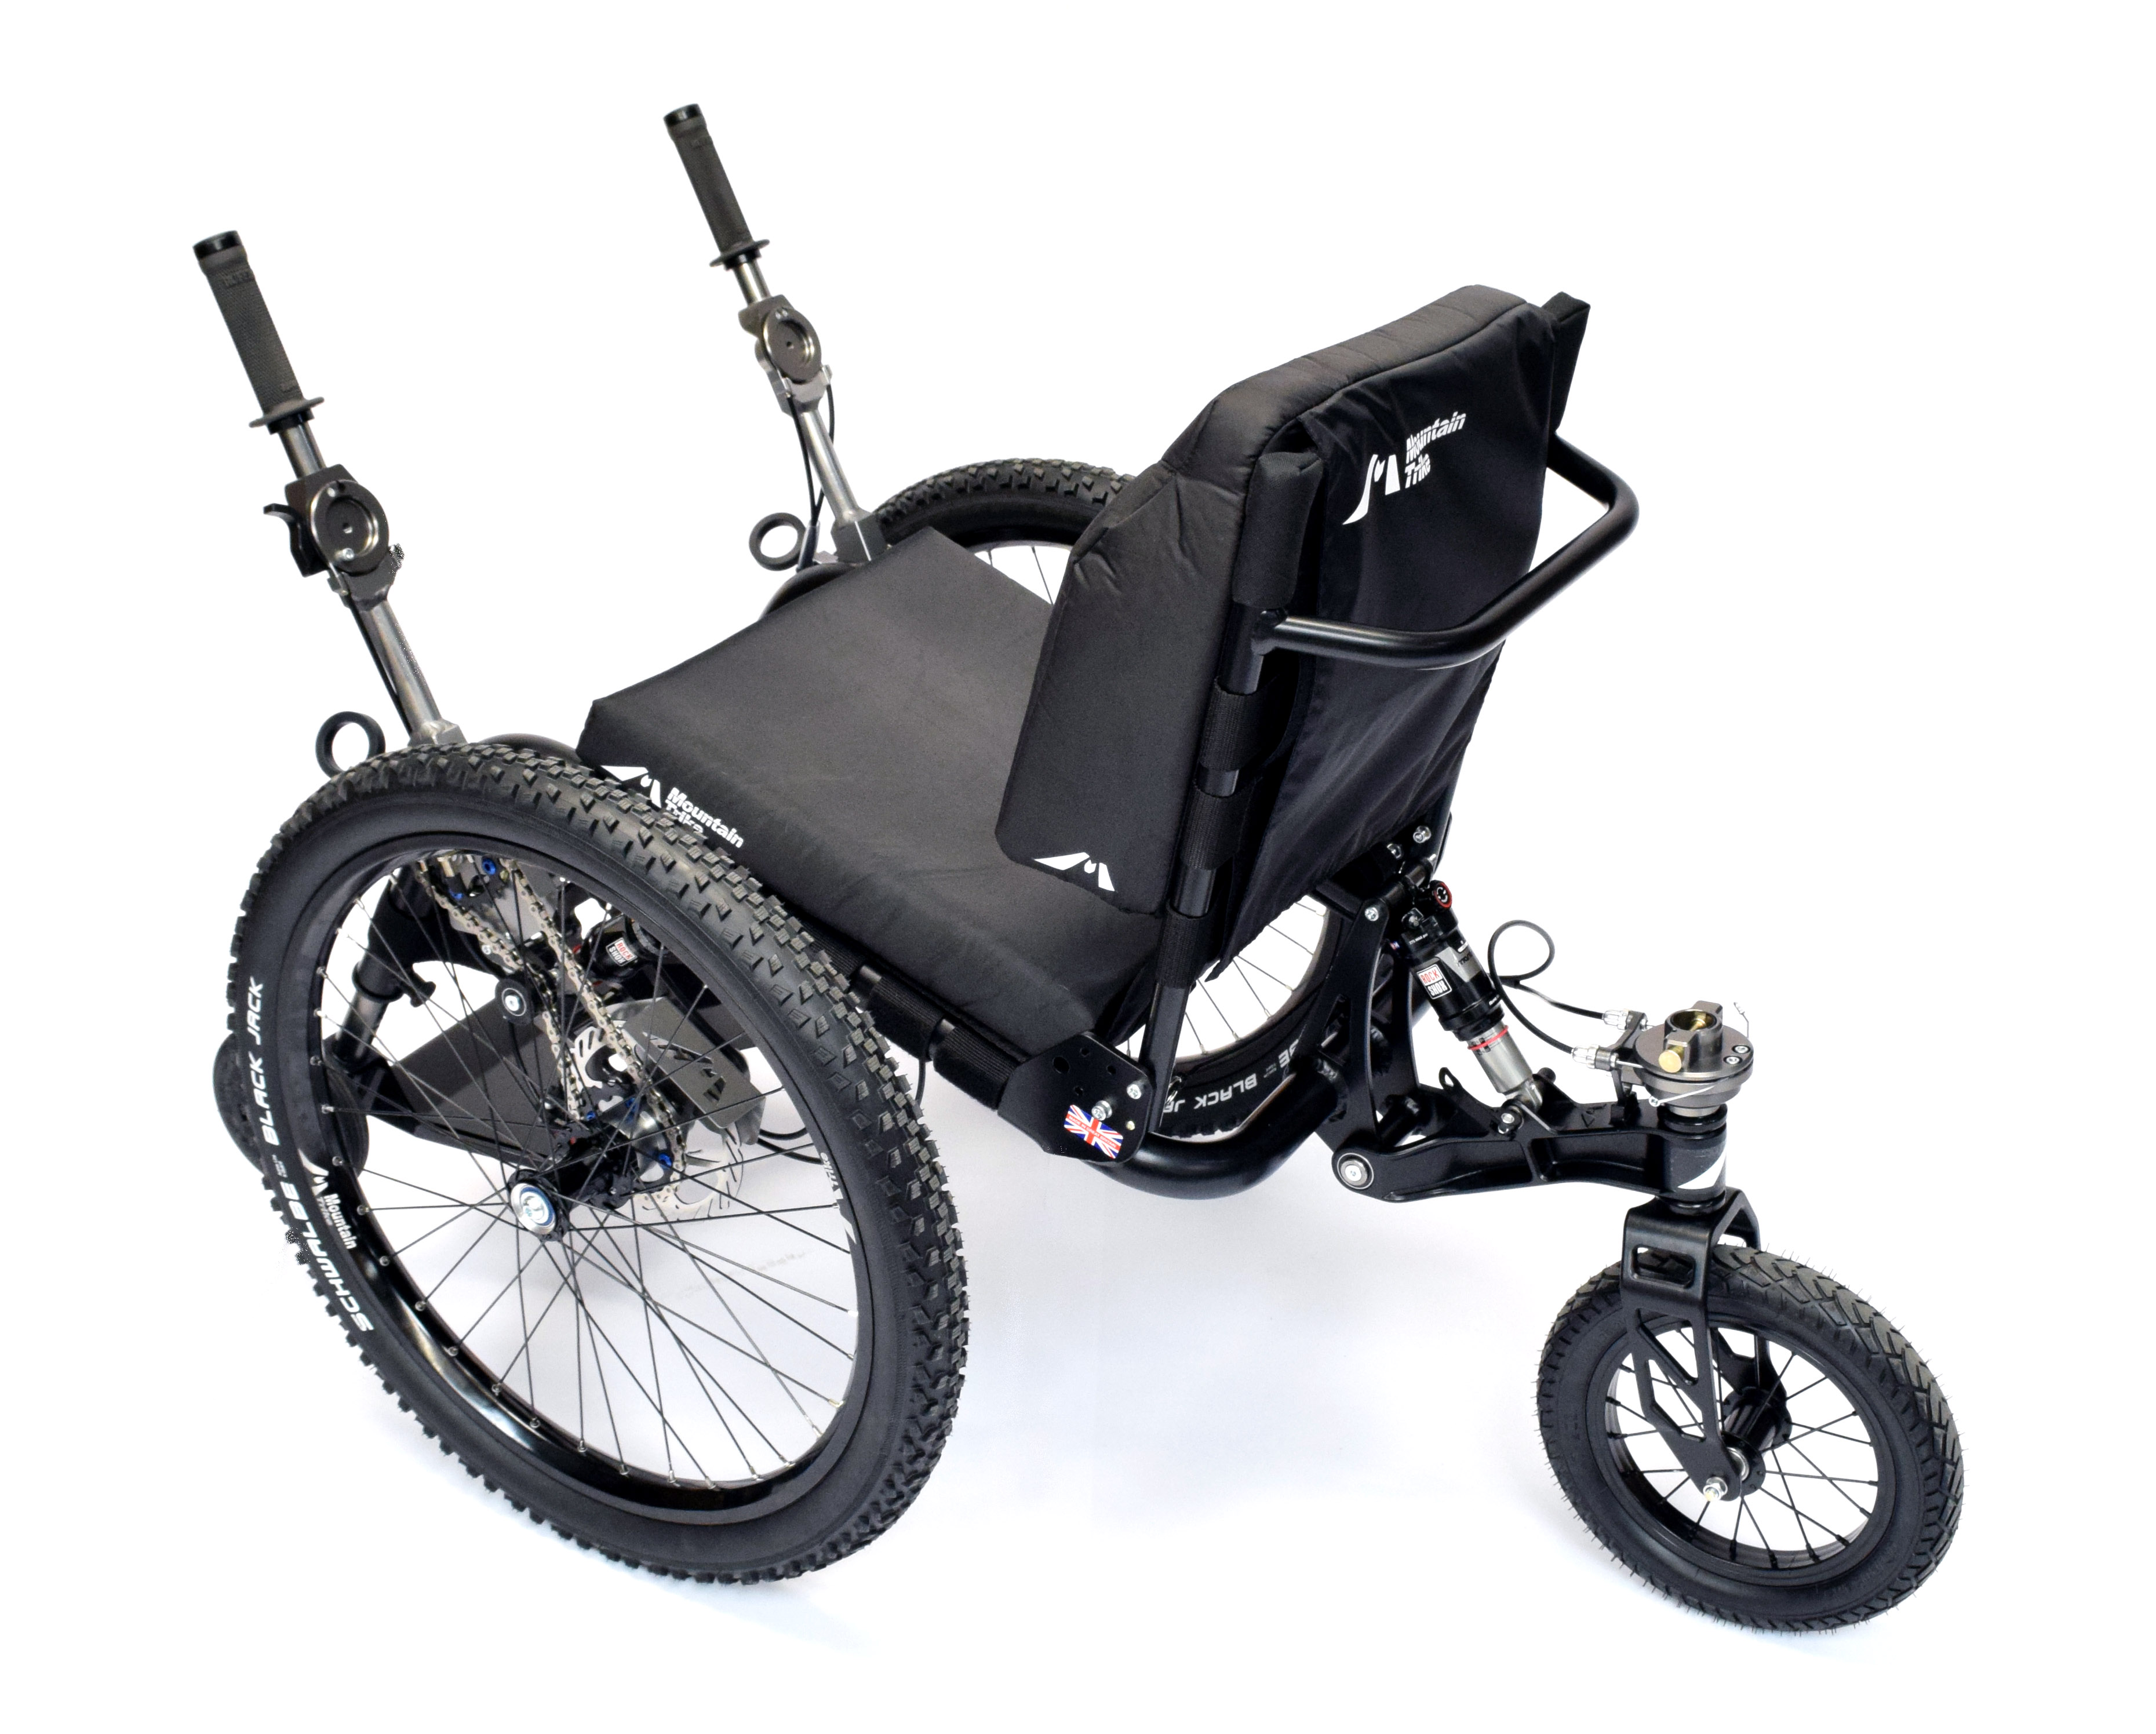 Mountain Trike Evo - new product from the all-terrain wheelchair company